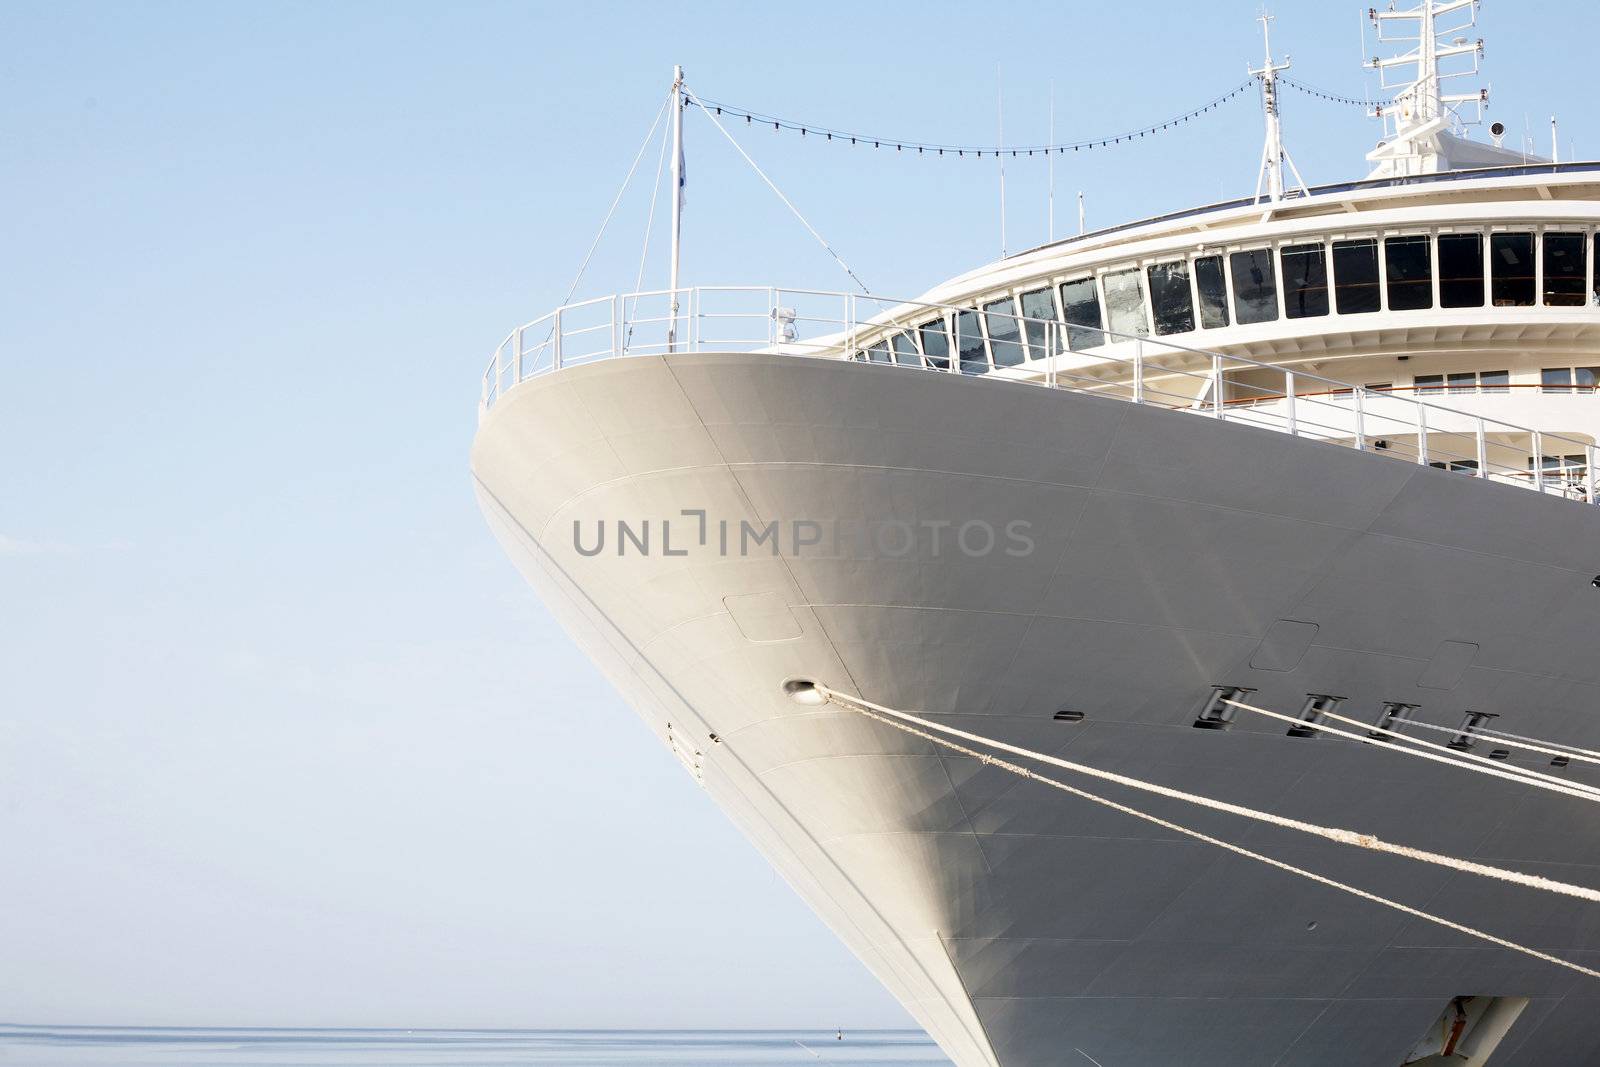 An image of front view of modern cruise liner